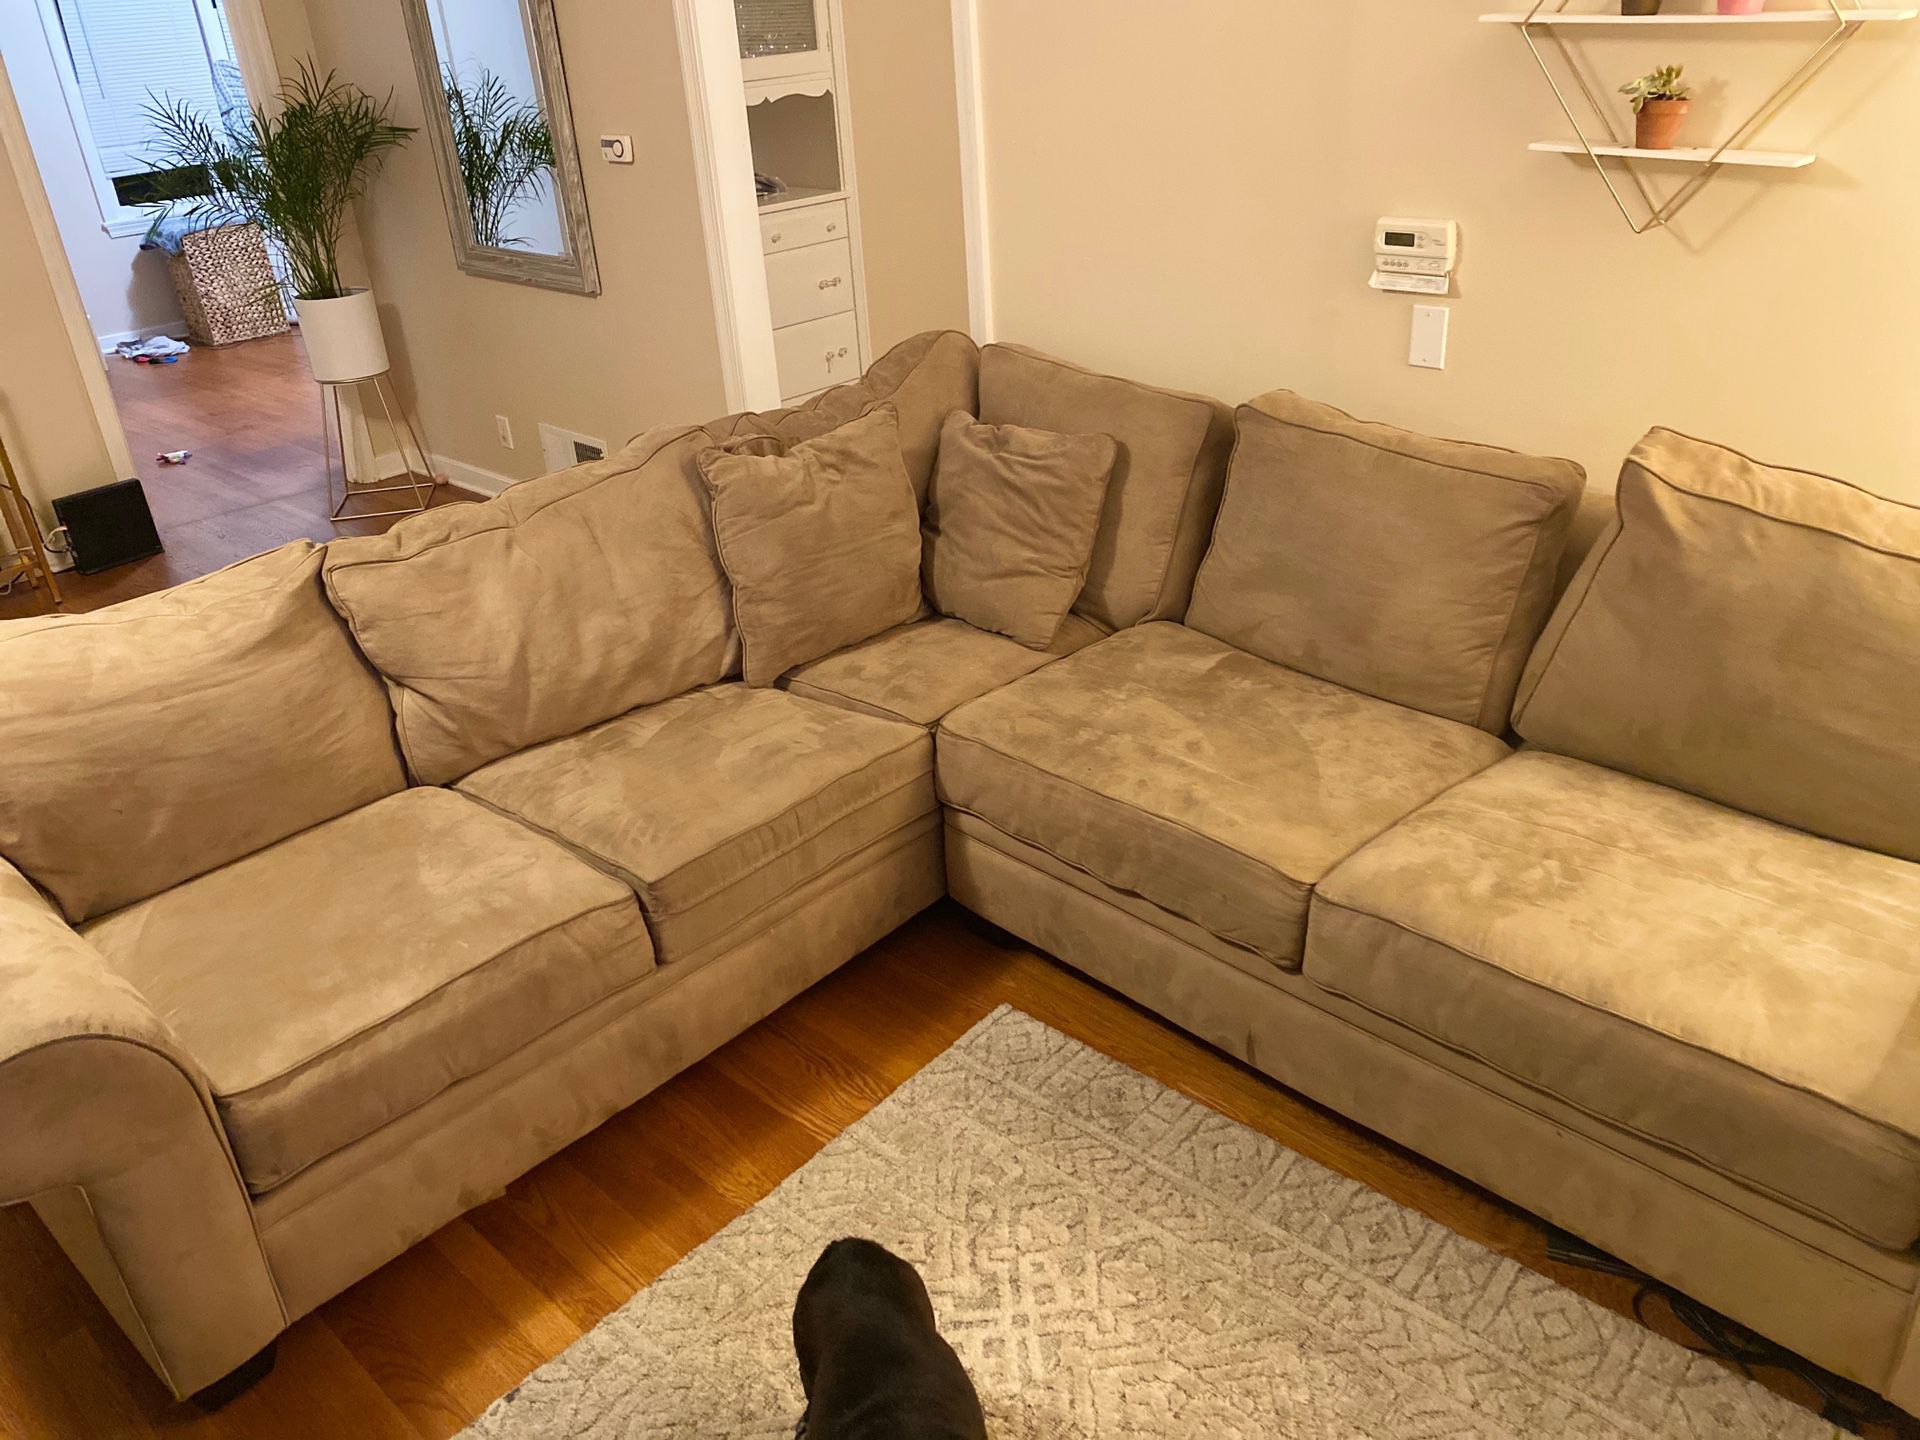 Caramel sectional “L” couch. Great condition :)